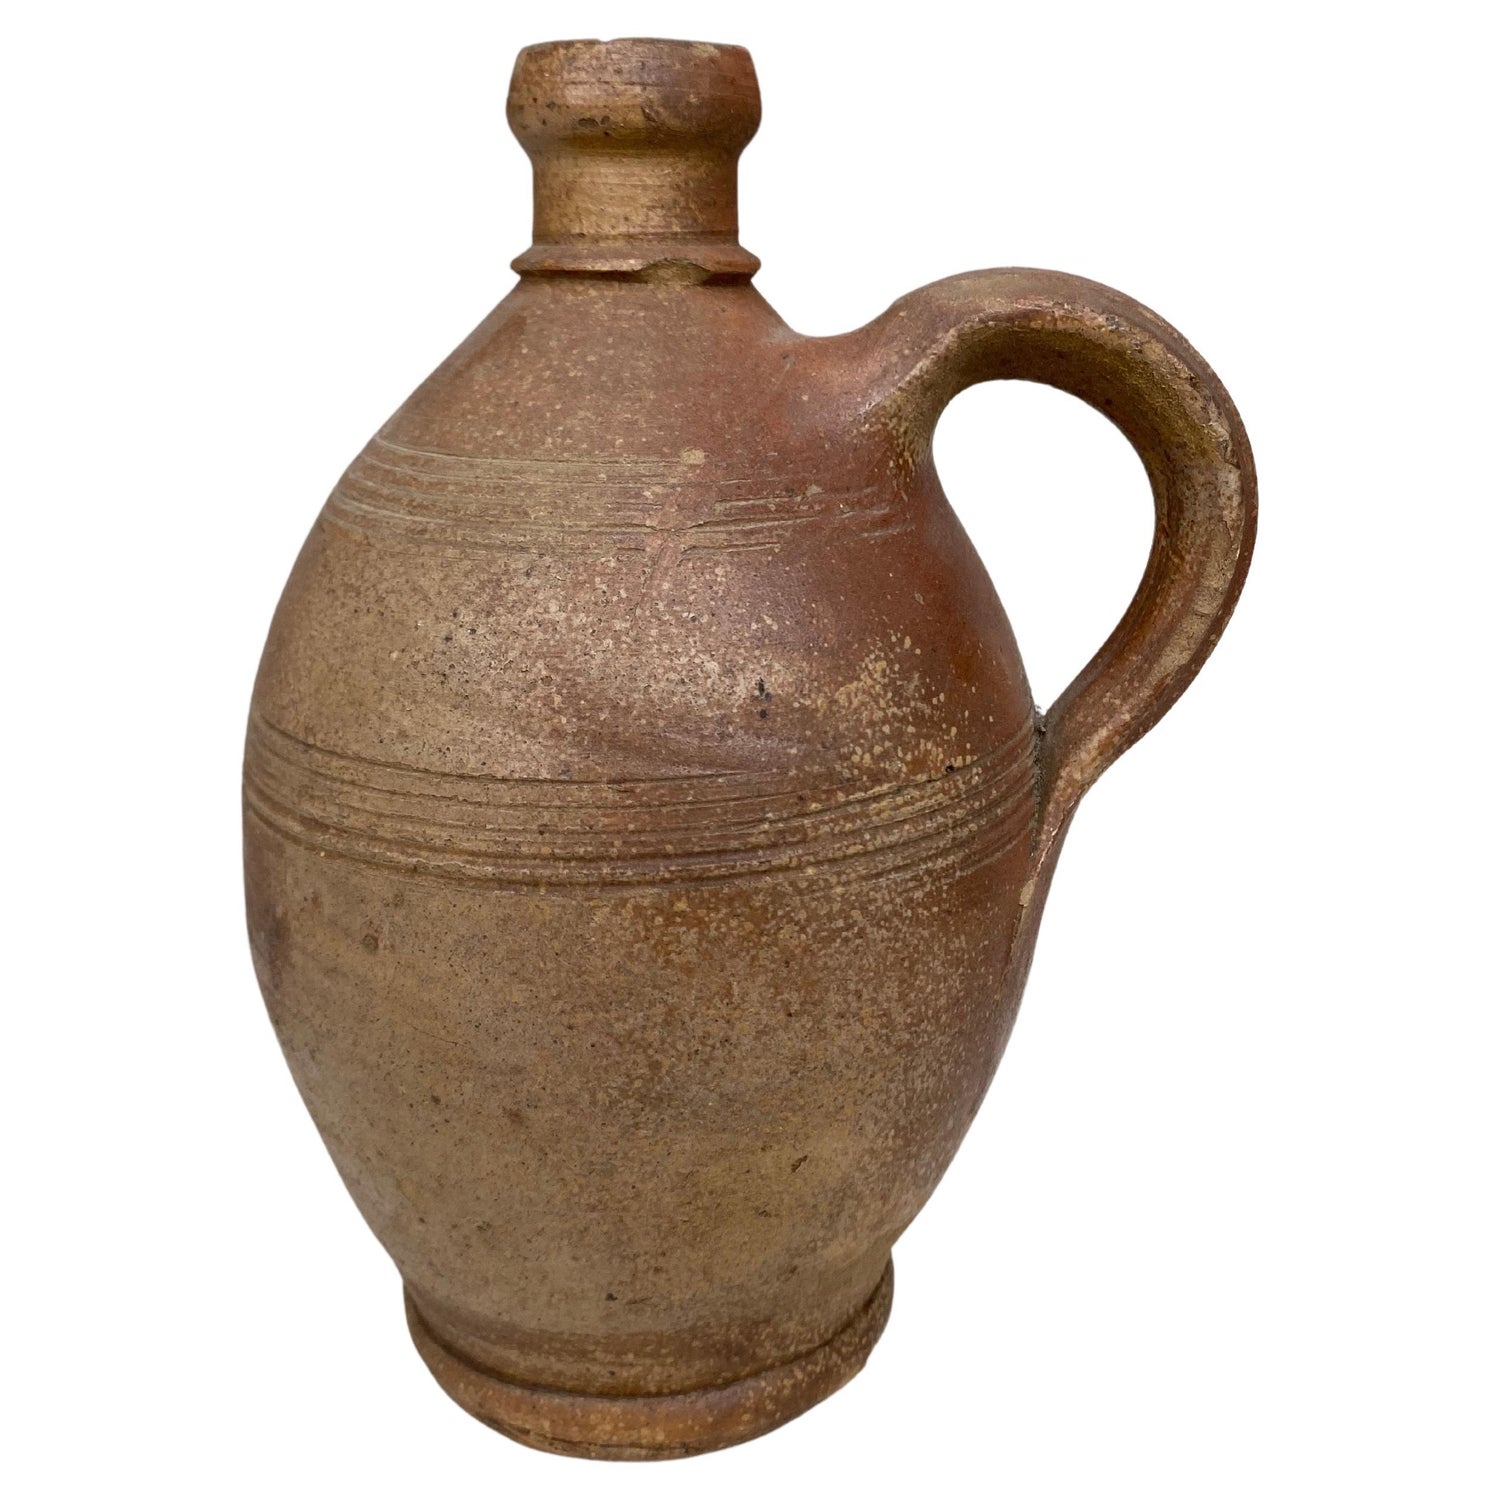 https://a.1stdibscdn.com/19th-century-french-rustic-pottery-pitcher-for-sale/f_23793/f_310544621667074987966/f_31054462_1667074988958_bg_processed.jpg?width=1500